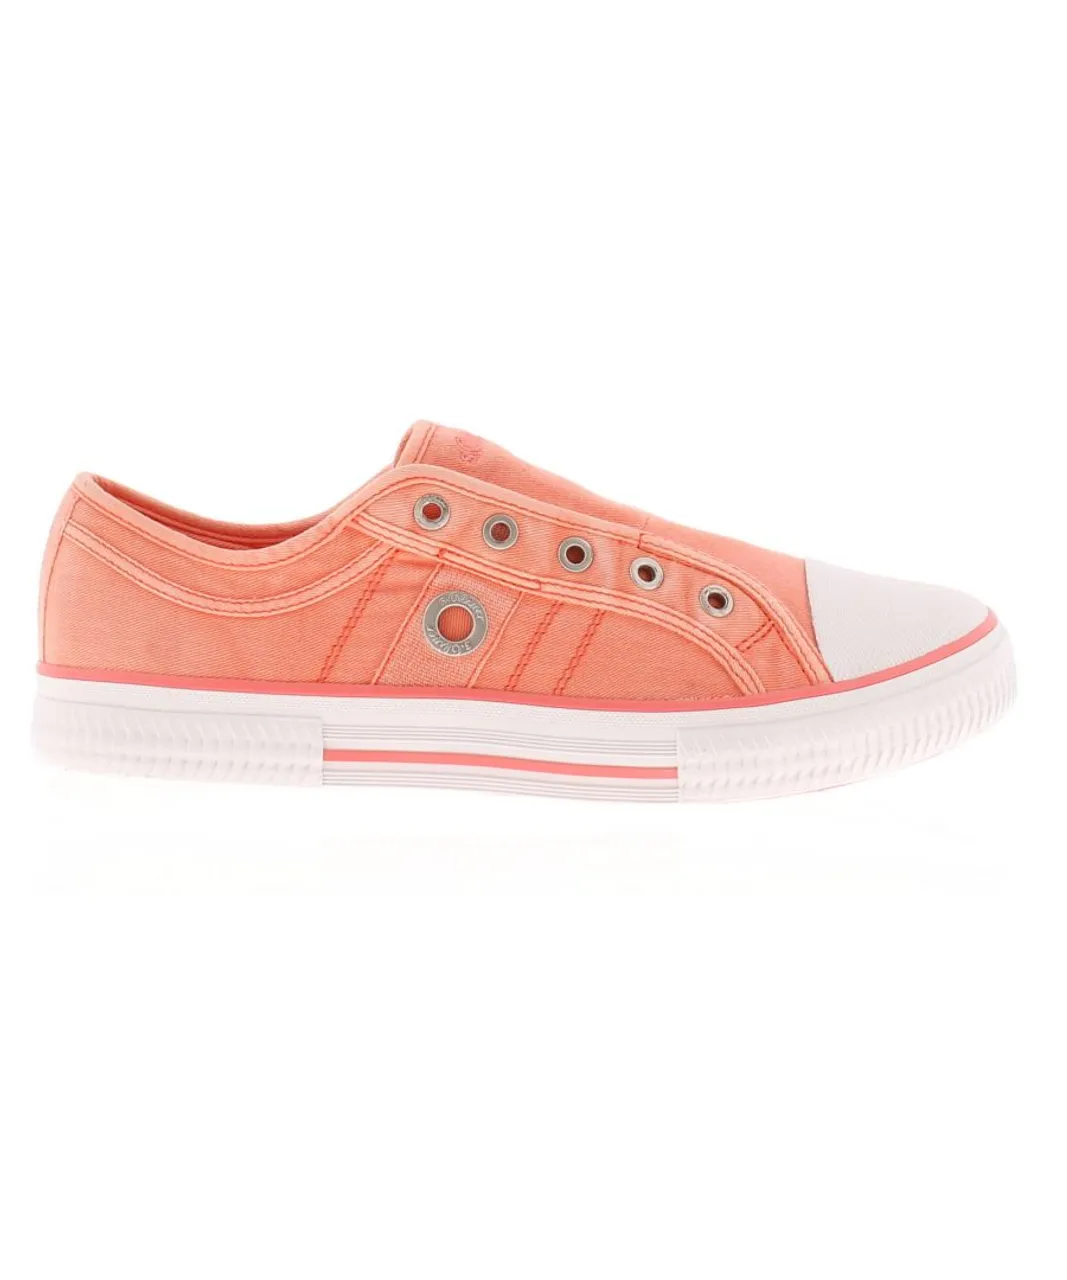 s.Oliver S Oliver Womens Pumps Plimsolls Trainers Style Slip On salmon - Pink